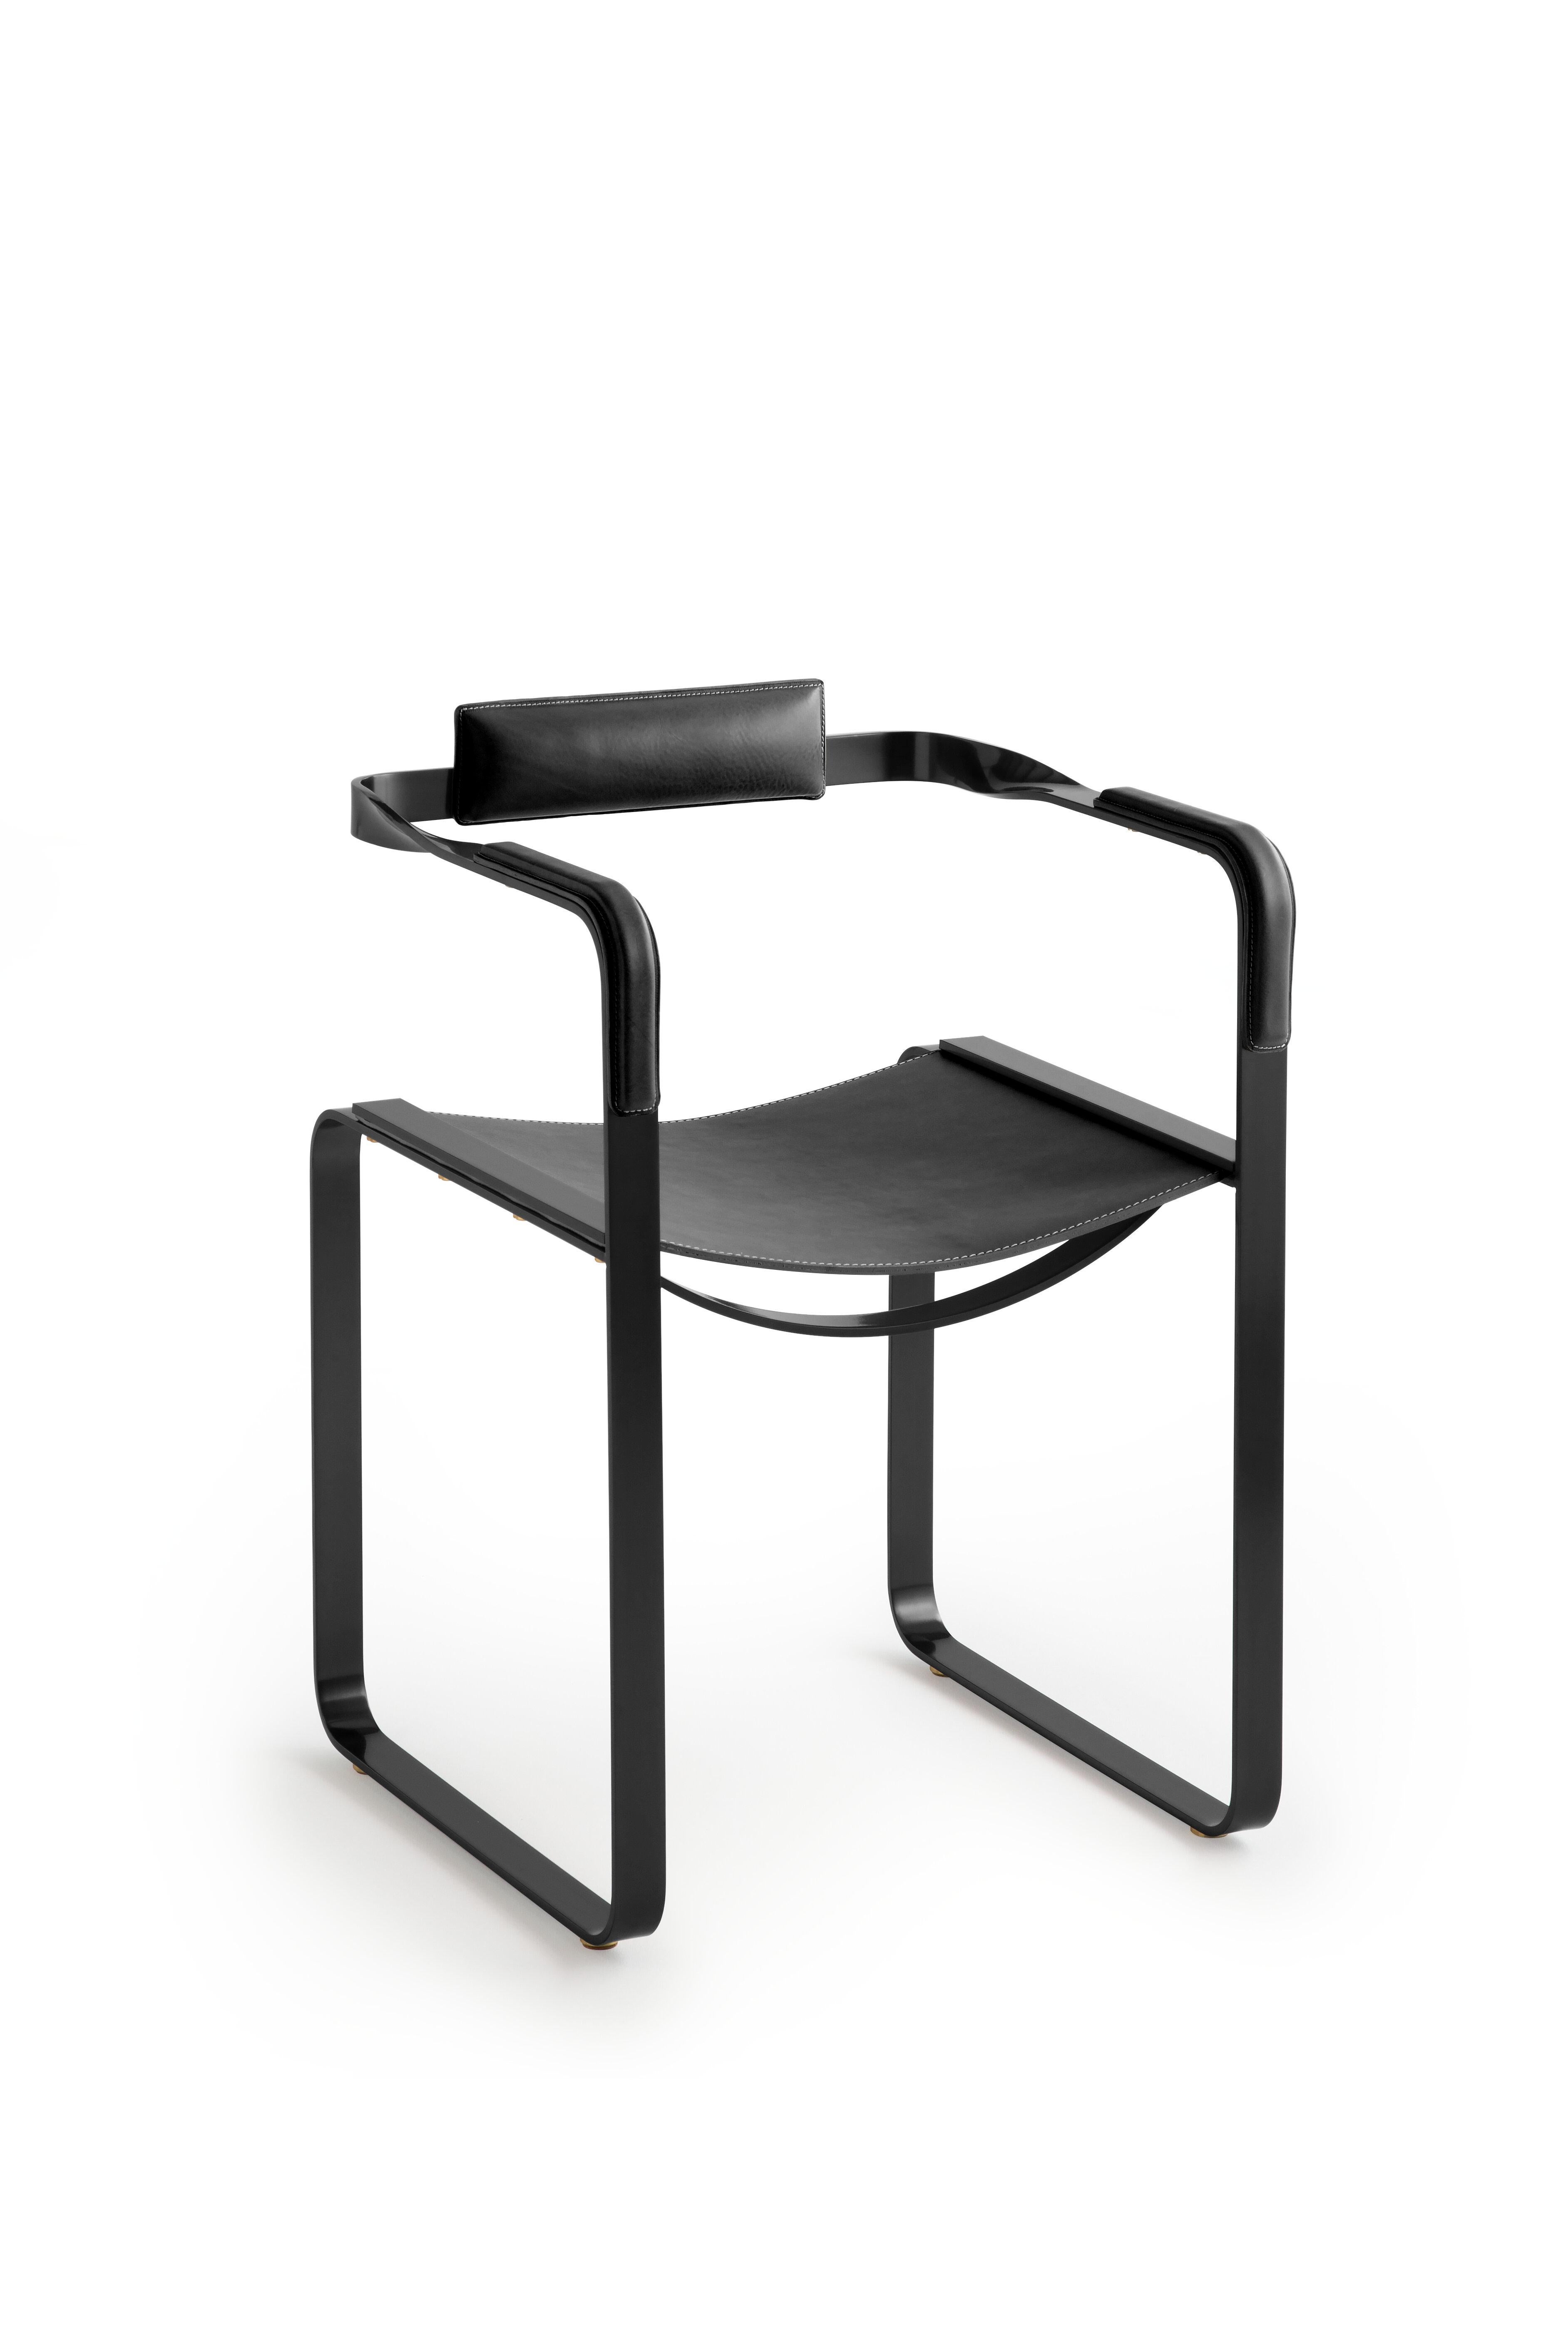 Minimalist Armchair, Black Smoke Steel and Black Leather, Contemporary Style For Sale